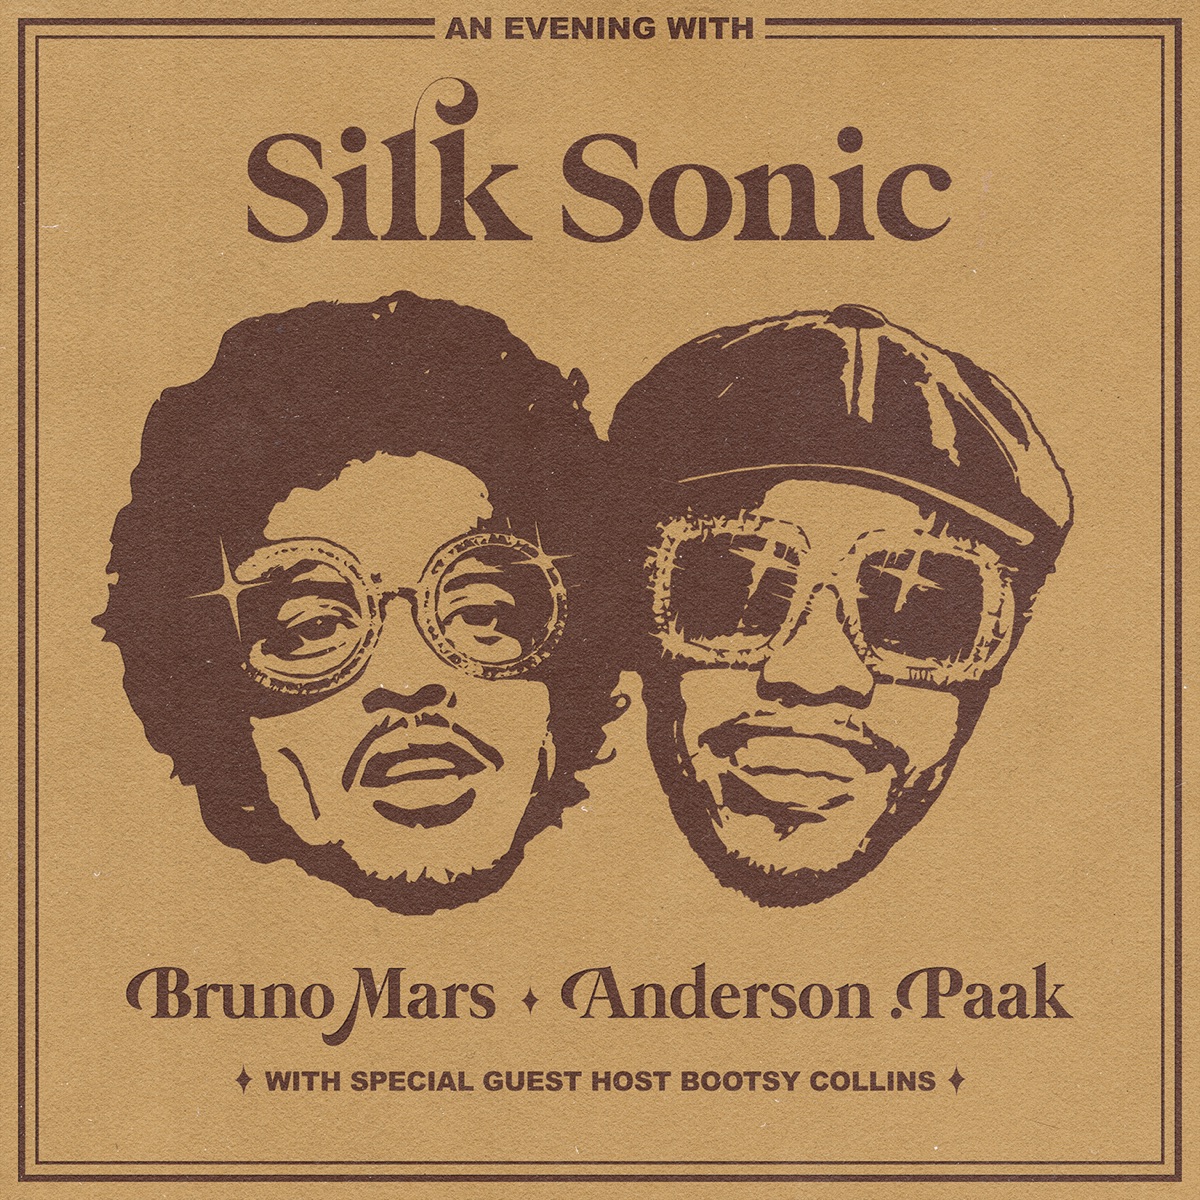 Cover for『Bruno Mars, Anderson .Paak, Silk Sonic - 777』from the release『An Evening With Silk Sonic 』